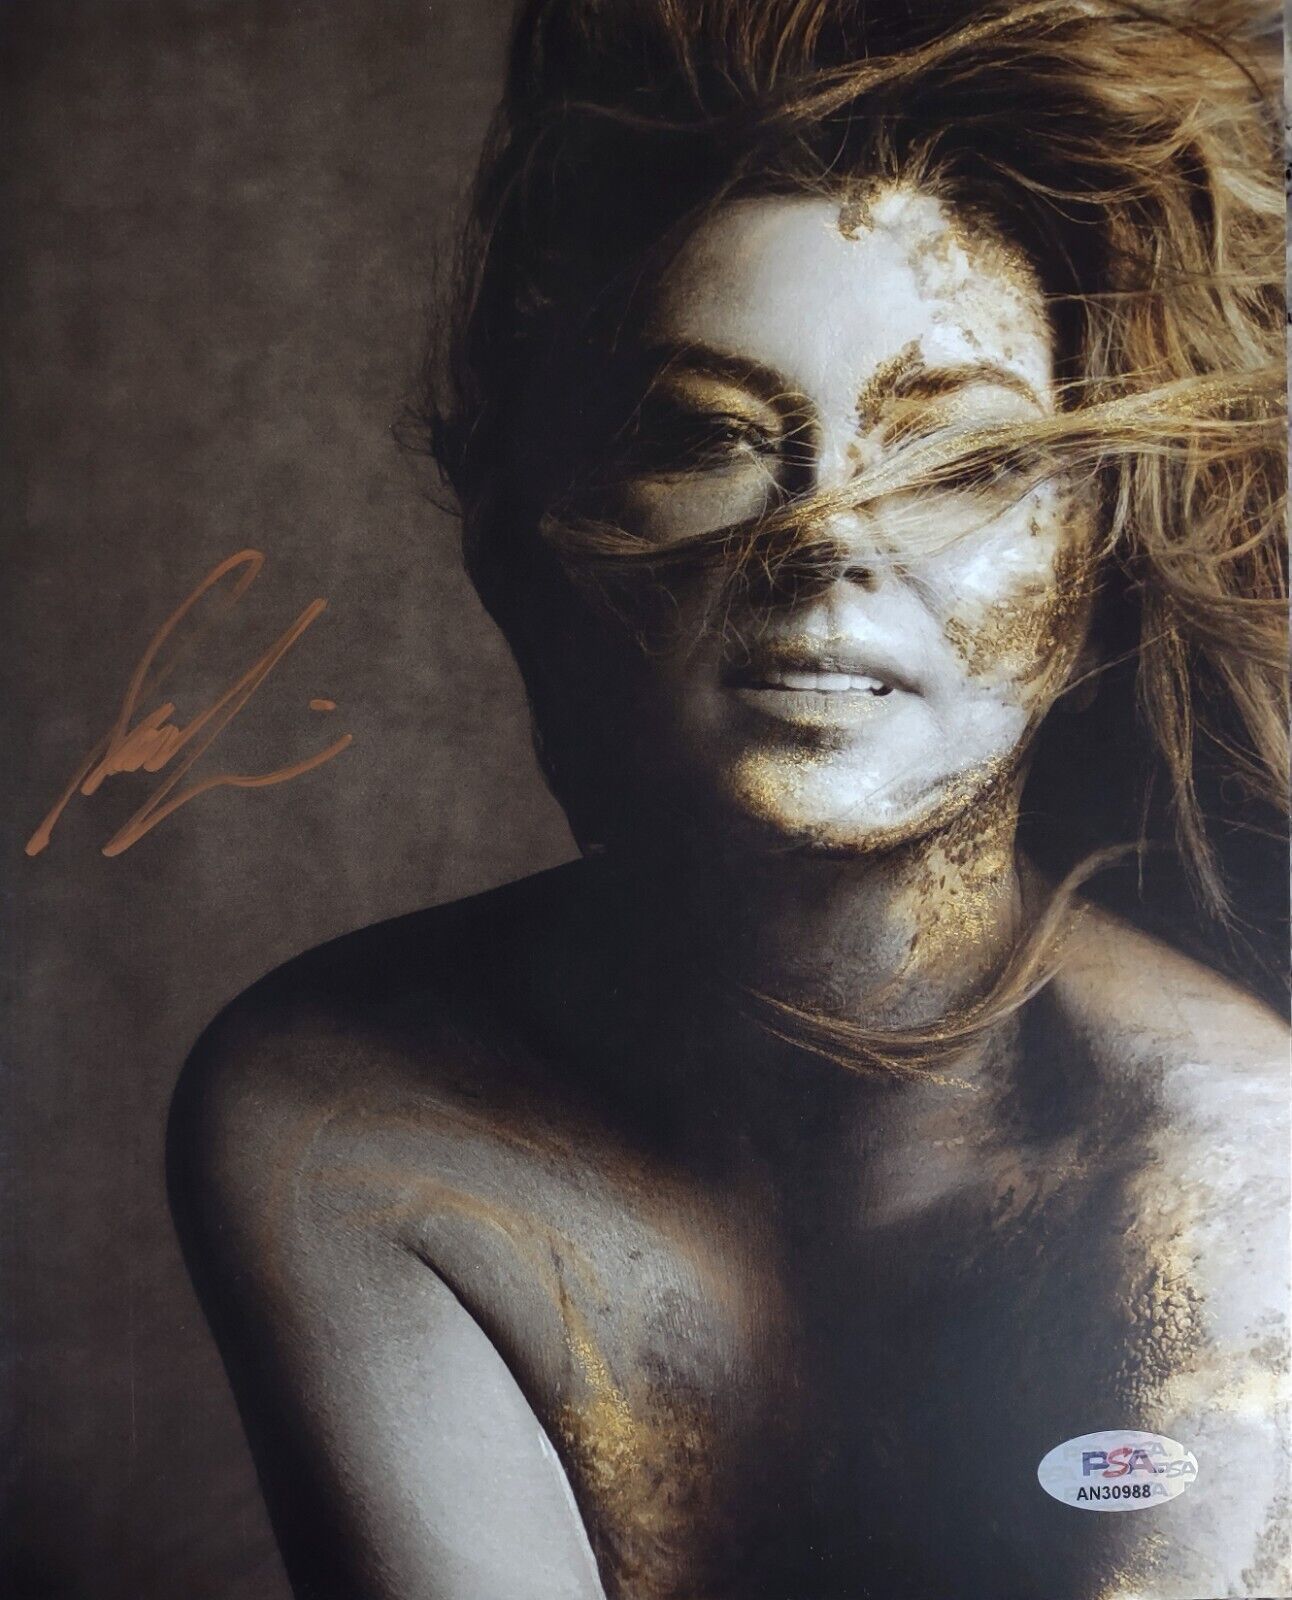 Primary image for BUY IT NOW SUPER SALE! Shania Twain Signed Autographed 8x10 Photo PSA COA!